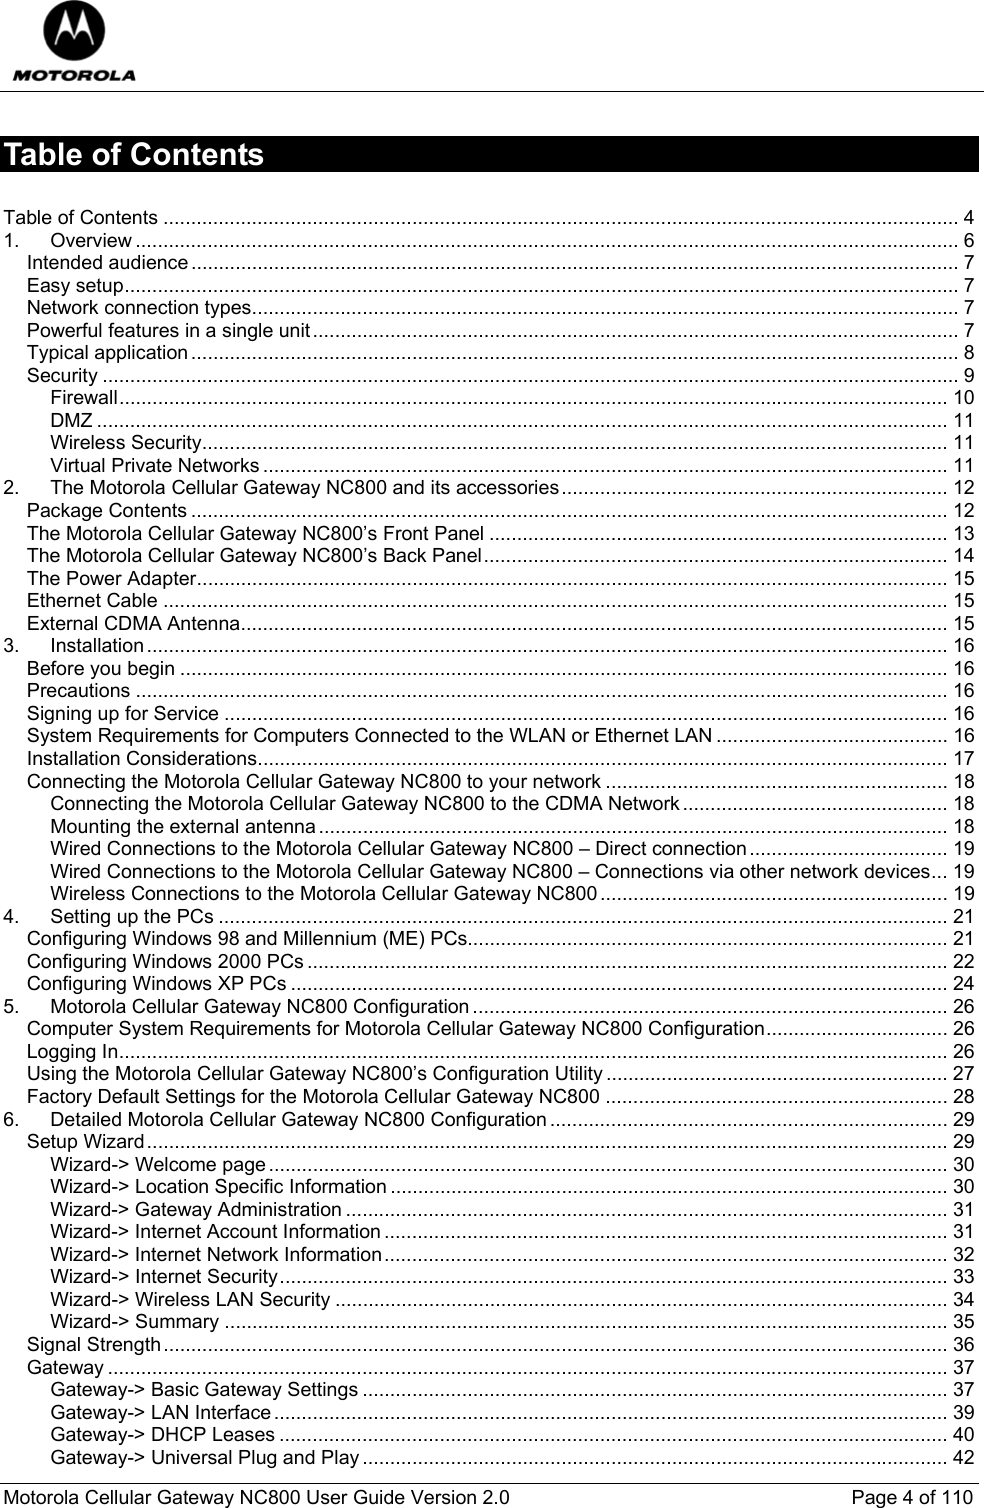  Motorola Cellular Gateway NC800 User Guide Version 2.0     Page 4 of 110  Table of Contents  Table of Contents ................................................................................................................................................ 4 1. Overview ..................................................................................................................................................... 6 Intended audience........................................................................................................................................... 7 Easy setup....................................................................................................................................................... 7 Network connection types................................................................................................................................ 7 Powerful features in a single unit..................................................................................................................... 7 Typical application........................................................................................................................................... 8 Security ........................................................................................................................................................... 9 Firewall...................................................................................................................................................... 10 DMZ .......................................................................................................................................................... 11 Wireless Security....................................................................................................................................... 11 Virtual Private Networks............................................................................................................................ 11 2. The Motorola Cellular Gateway NC800 and its accessories...................................................................... 12 Package Contents ......................................................................................................................................... 12 The Motorola Cellular Gateway NC800’s Front Panel ................................................................................... 13 The Motorola Cellular Gateway NC800’s Back Panel.................................................................................... 14 The Power Adapter........................................................................................................................................ 15 Ethernet Cable .............................................................................................................................................. 15 External CDMA Antenna................................................................................................................................ 15 3. Installation................................................................................................................................................. 16 Before you begin ........................................................................................................................................... 16 Precautions ................................................................................................................................................... 16 Signing up for Service ................................................................................................................................... 16 System Requirements for Computers Connected to the WLAN or Ethernet LAN .......................................... 16 Installation Considerations............................................................................................................................. 17 Connecting the Motorola Cellular Gateway NC800 to your network .............................................................. 18 Connecting the Motorola Cellular Gateway NC800 to the CDMA Network................................................ 18 Mounting the external antenna.................................................................................................................. 18 Wired Connections to the Motorola Cellular Gateway NC800 – Direct connection.................................... 19 Wired Connections to the Motorola Cellular Gateway NC800 – Connections via other network devices... 19 Wireless Connections to the Motorola Cellular Gateway NC800............................................................... 19 4. Setting up the PCs .................................................................................................................................... 21 Configuring Windows 98 and Millennium (ME) PCs....................................................................................... 21 Configuring Windows 2000 PCs .................................................................................................................... 22 Configuring Windows XP PCs ....................................................................................................................... 24 5. Motorola Cellular Gateway NC800 Configuration ...................................................................................... 26 Computer System Requirements for Motorola Cellular Gateway NC800 Configuration................................. 26 Logging In...................................................................................................................................................... 26 Using the Motorola Cellular Gateway NC800’s Configuration Utility.............................................................. 27 Factory Default Settings for the Motorola Cellular Gateway NC800 .............................................................. 28 6. Detailed Motorola Cellular Gateway NC800 Configuration ........................................................................ 29 Setup Wizard................................................................................................................................................. 29 Wizard-&gt; Welcome page........................................................................................................................... 30 Wizard-&gt; Location Specific Information ..................................................................................................... 30 Wizard-&gt; Gateway Administration ............................................................................................................. 31 Wizard-&gt; Internet Account Information ...................................................................................................... 31 Wizard-&gt; Internet Network Information...................................................................................................... 32 Wizard-&gt; Internet Security......................................................................................................................... 33 Wizard-&gt; Wireless LAN Security ............................................................................................................... 34 Wizard-&gt; Summary ................................................................................................................................... 35 Signal Strength.............................................................................................................................................. 36 Gateway ........................................................................................................................................................ 37 Gateway-&gt; Basic Gateway Settings .......................................................................................................... 37 Gateway-&gt; LAN Interface.......................................................................................................................... 39 Gateway-&gt; DHCP Leases ......................................................................................................................... 40 Gateway-&gt; Universal Plug and Play.......................................................................................................... 42 